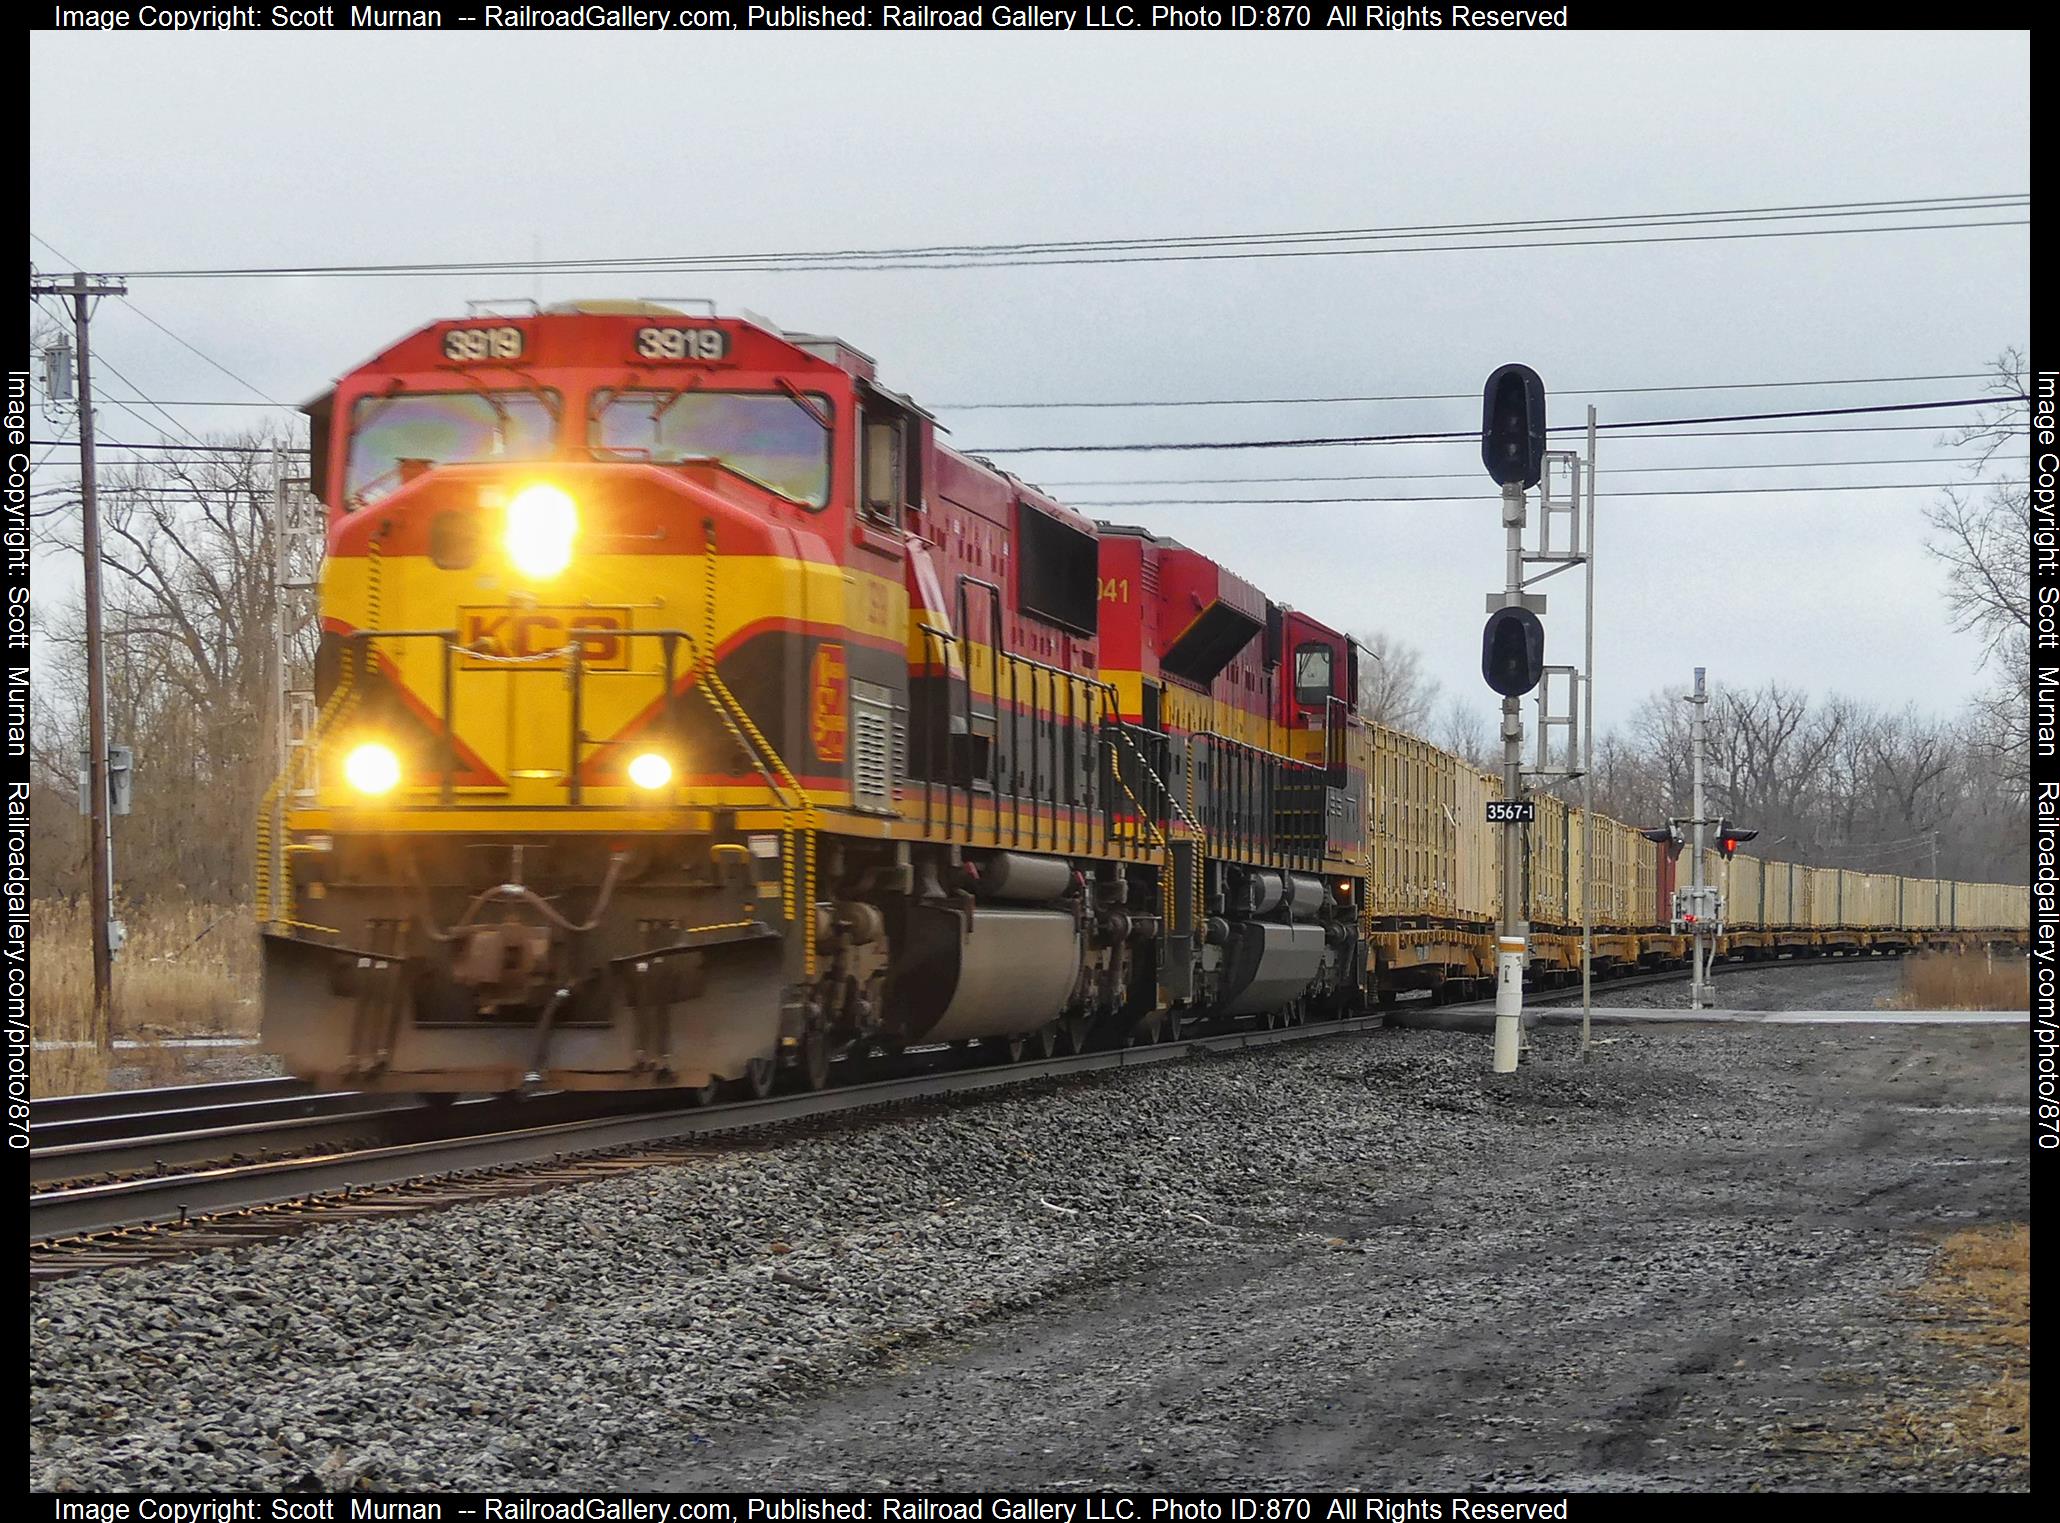 KCS 3919 is a class EMD SD70MAC and  is pictured in Macedon, New York, United States.  This was taken along the Rochester Subdivision  on the CSX Transportation. Photo Copyright: Scott  Murnan  uploaded to Railroad Gallery on 03/23/2023. This photograph of KCS 3919 was taken on Thursday, March 23, 2023. All Rights Reserved. 